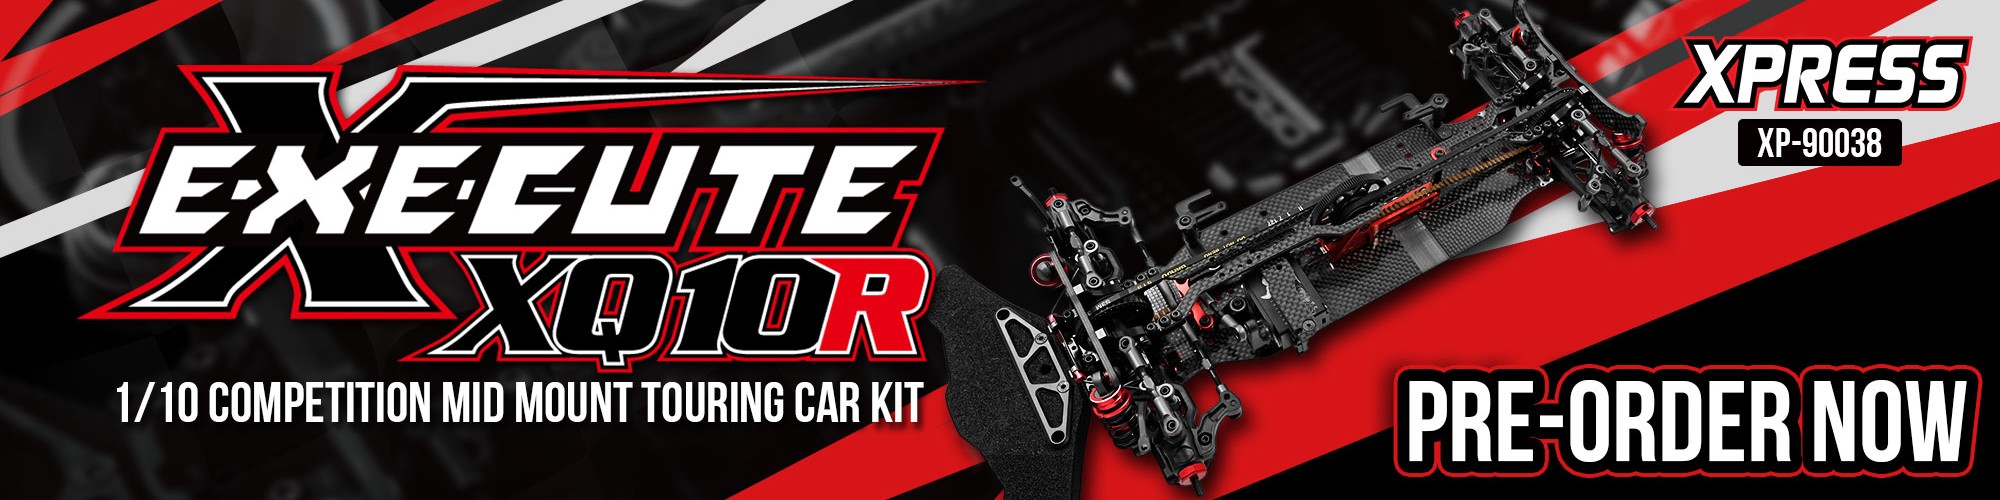 EXECUTE XQ10R 1/10 COMPETITION MID MOUNT TOURING CAR KIT